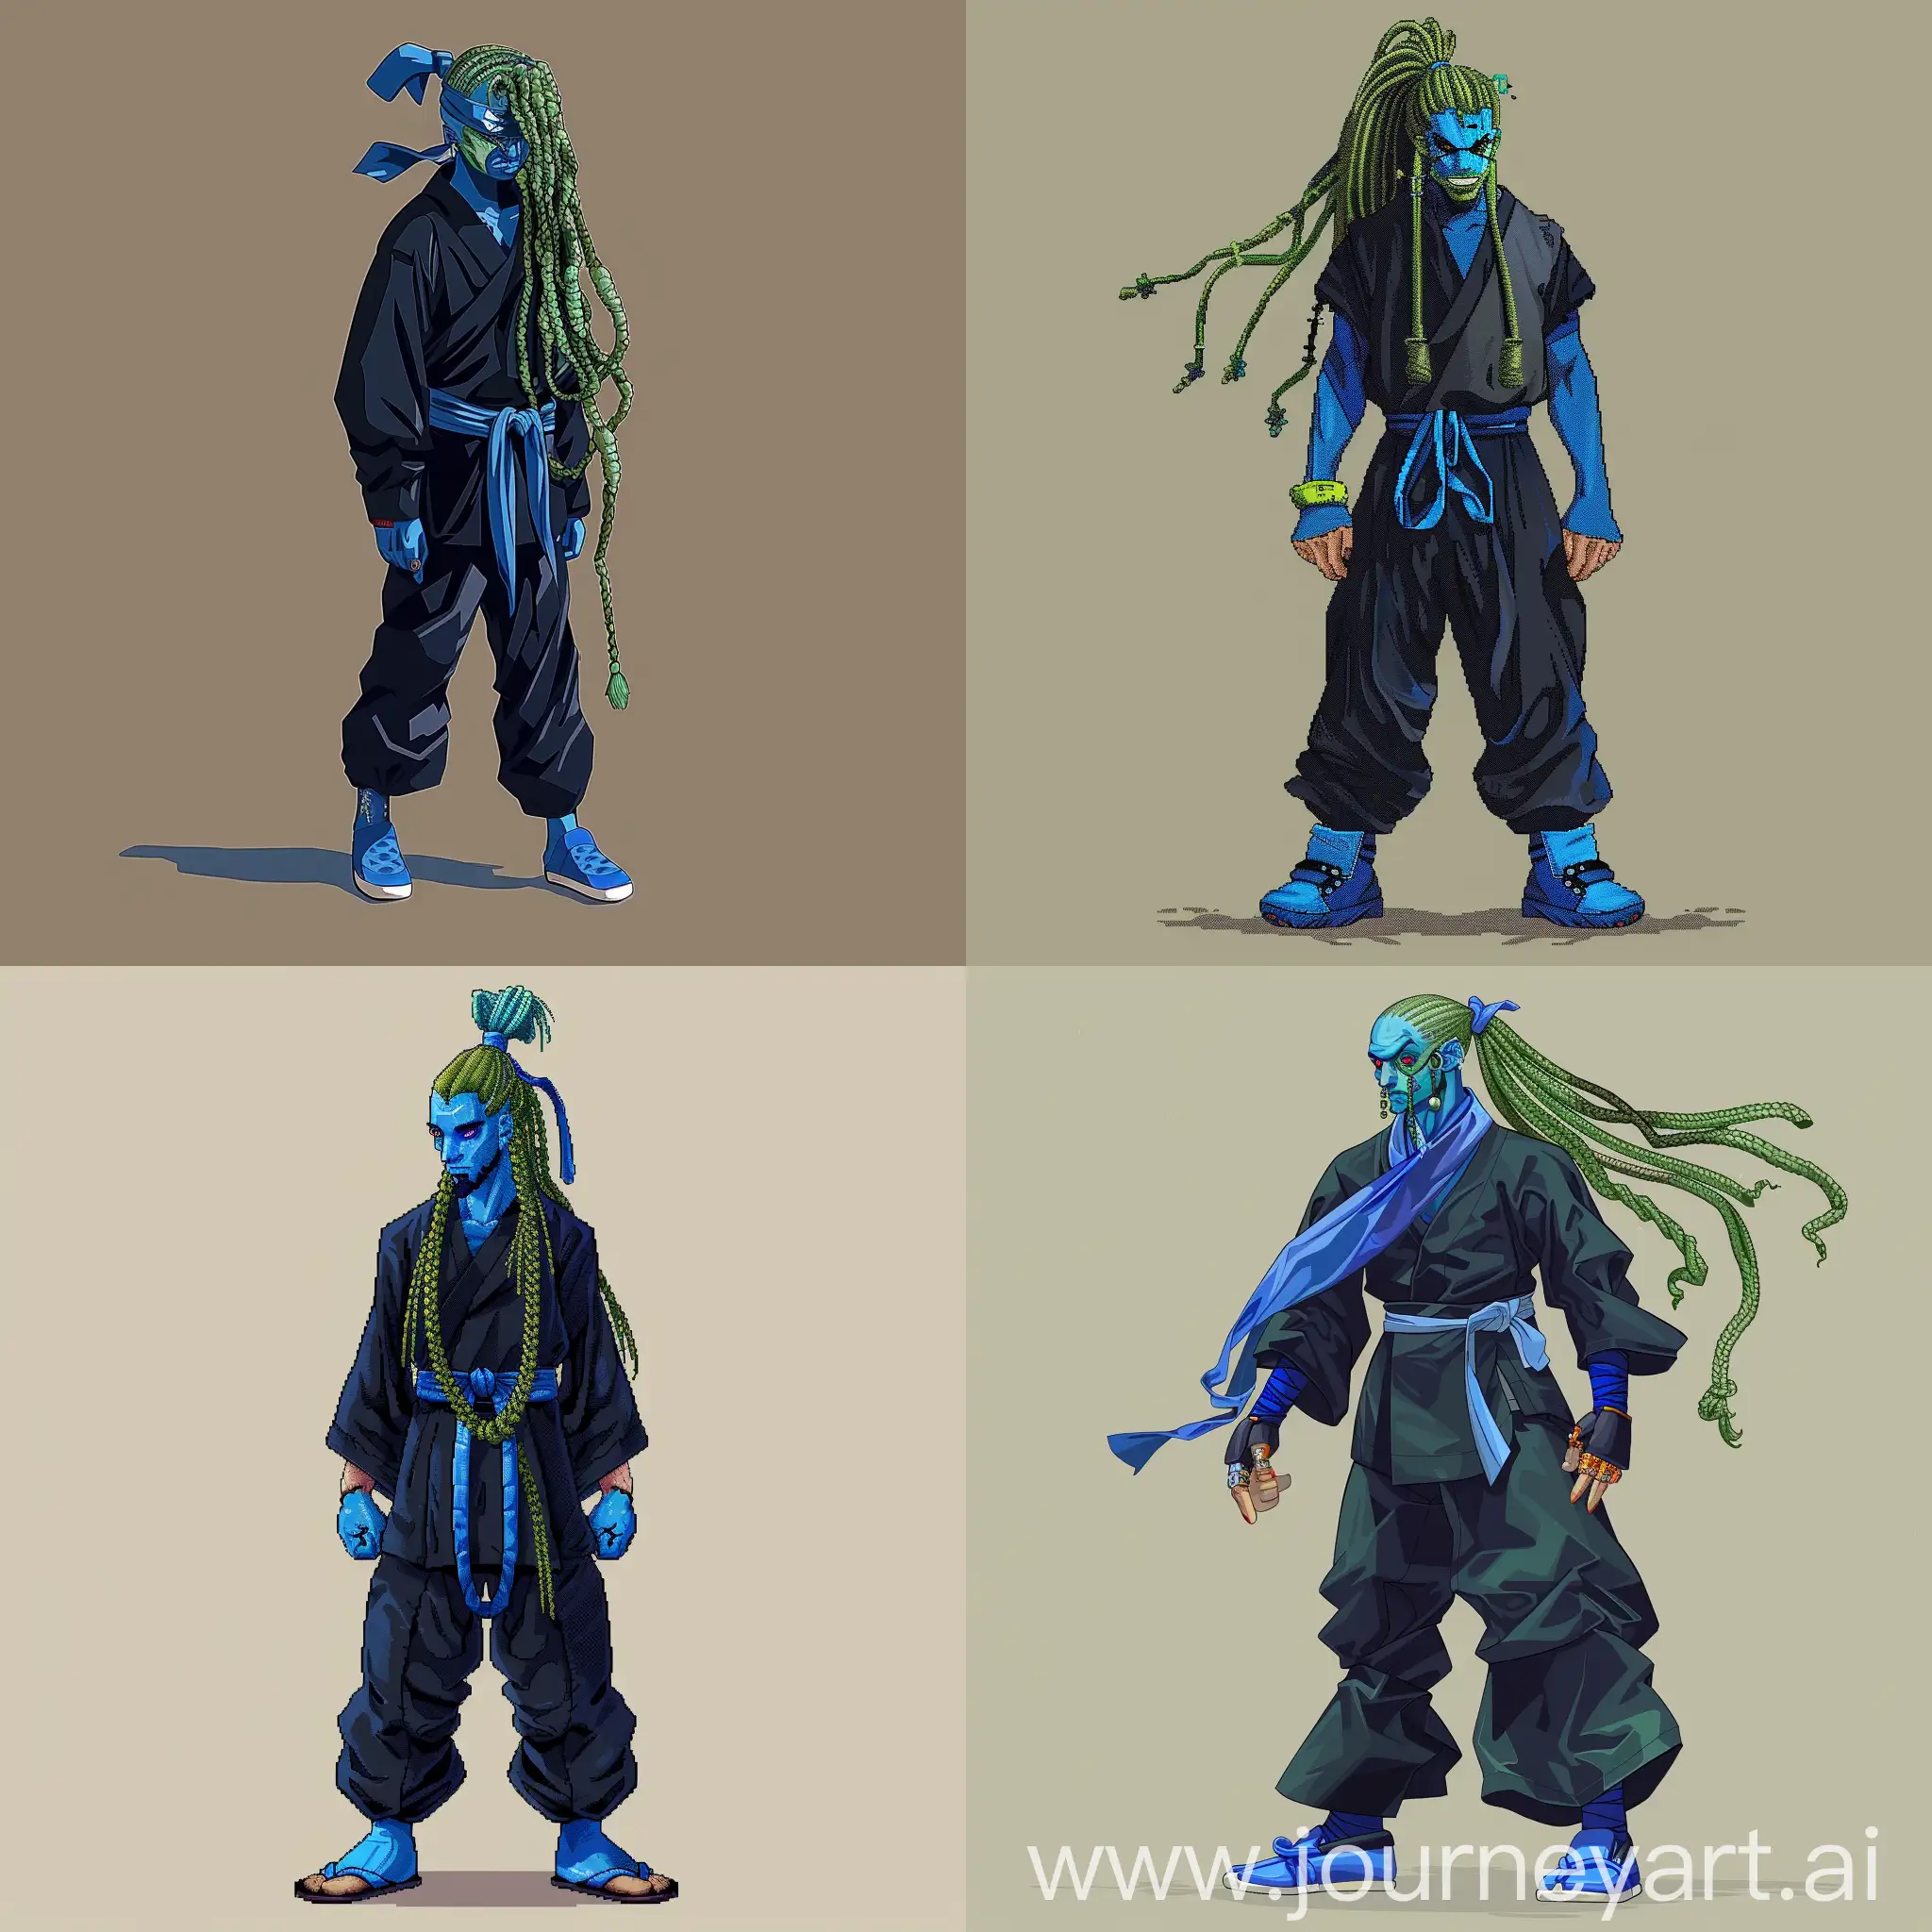 Create a 64 bit pixel detailed character art featuring a man with blue skin, long greenish hair tied up with a blue accessory,black outfit, Blue shoes